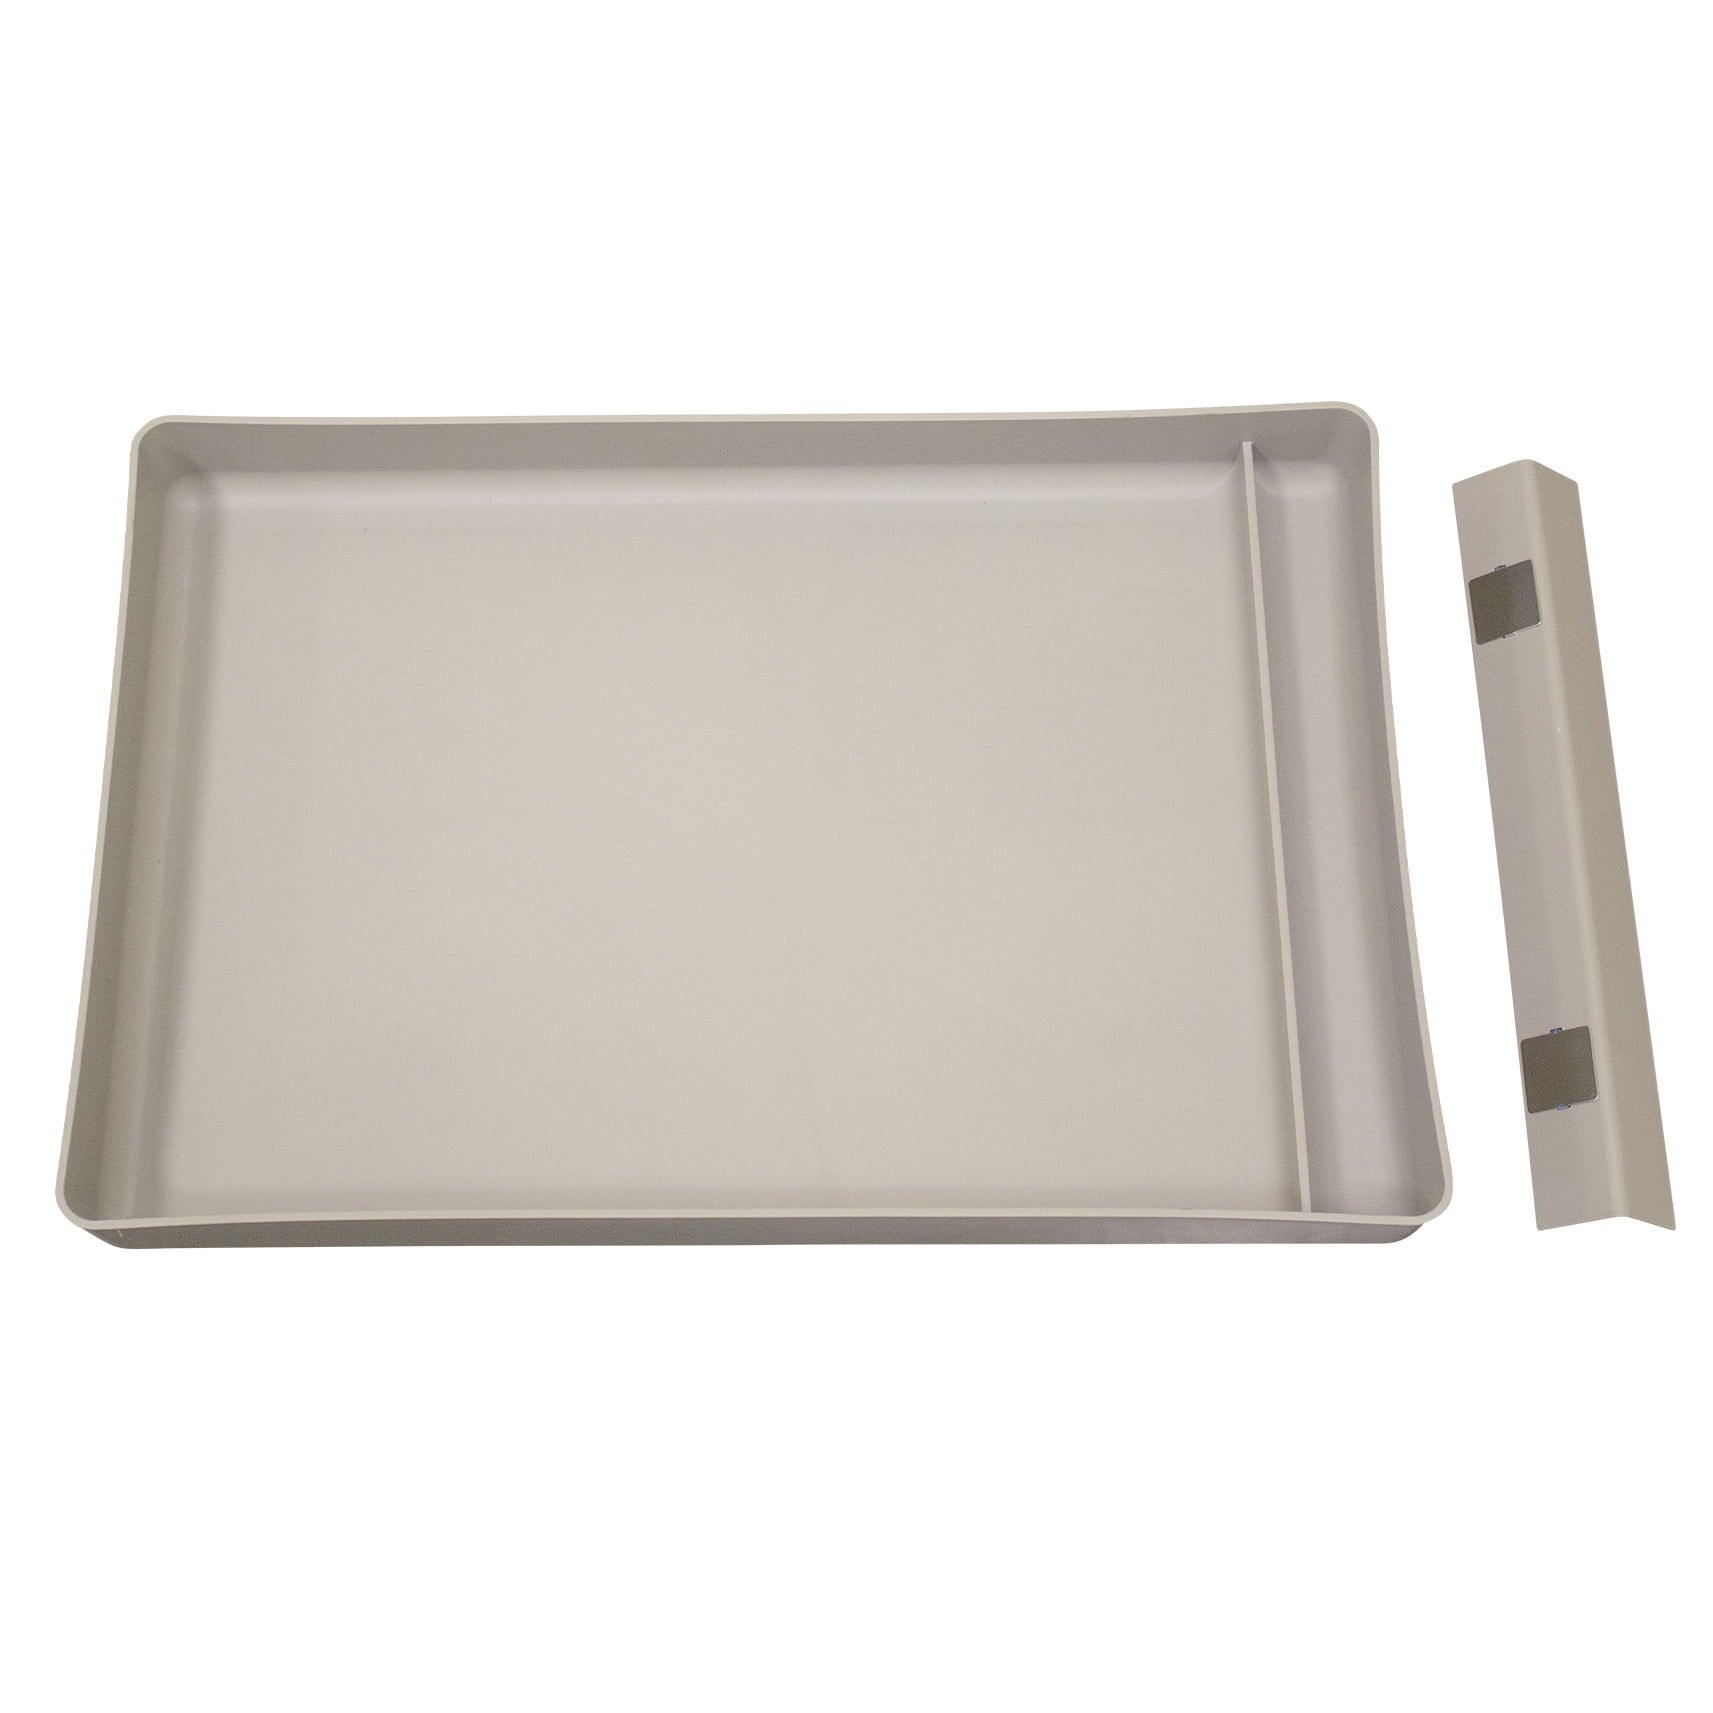 PET STANDARD Reusable Tray Compatible with PetSafe® ScoopFree® Self-Cleaning Cat Litterbox